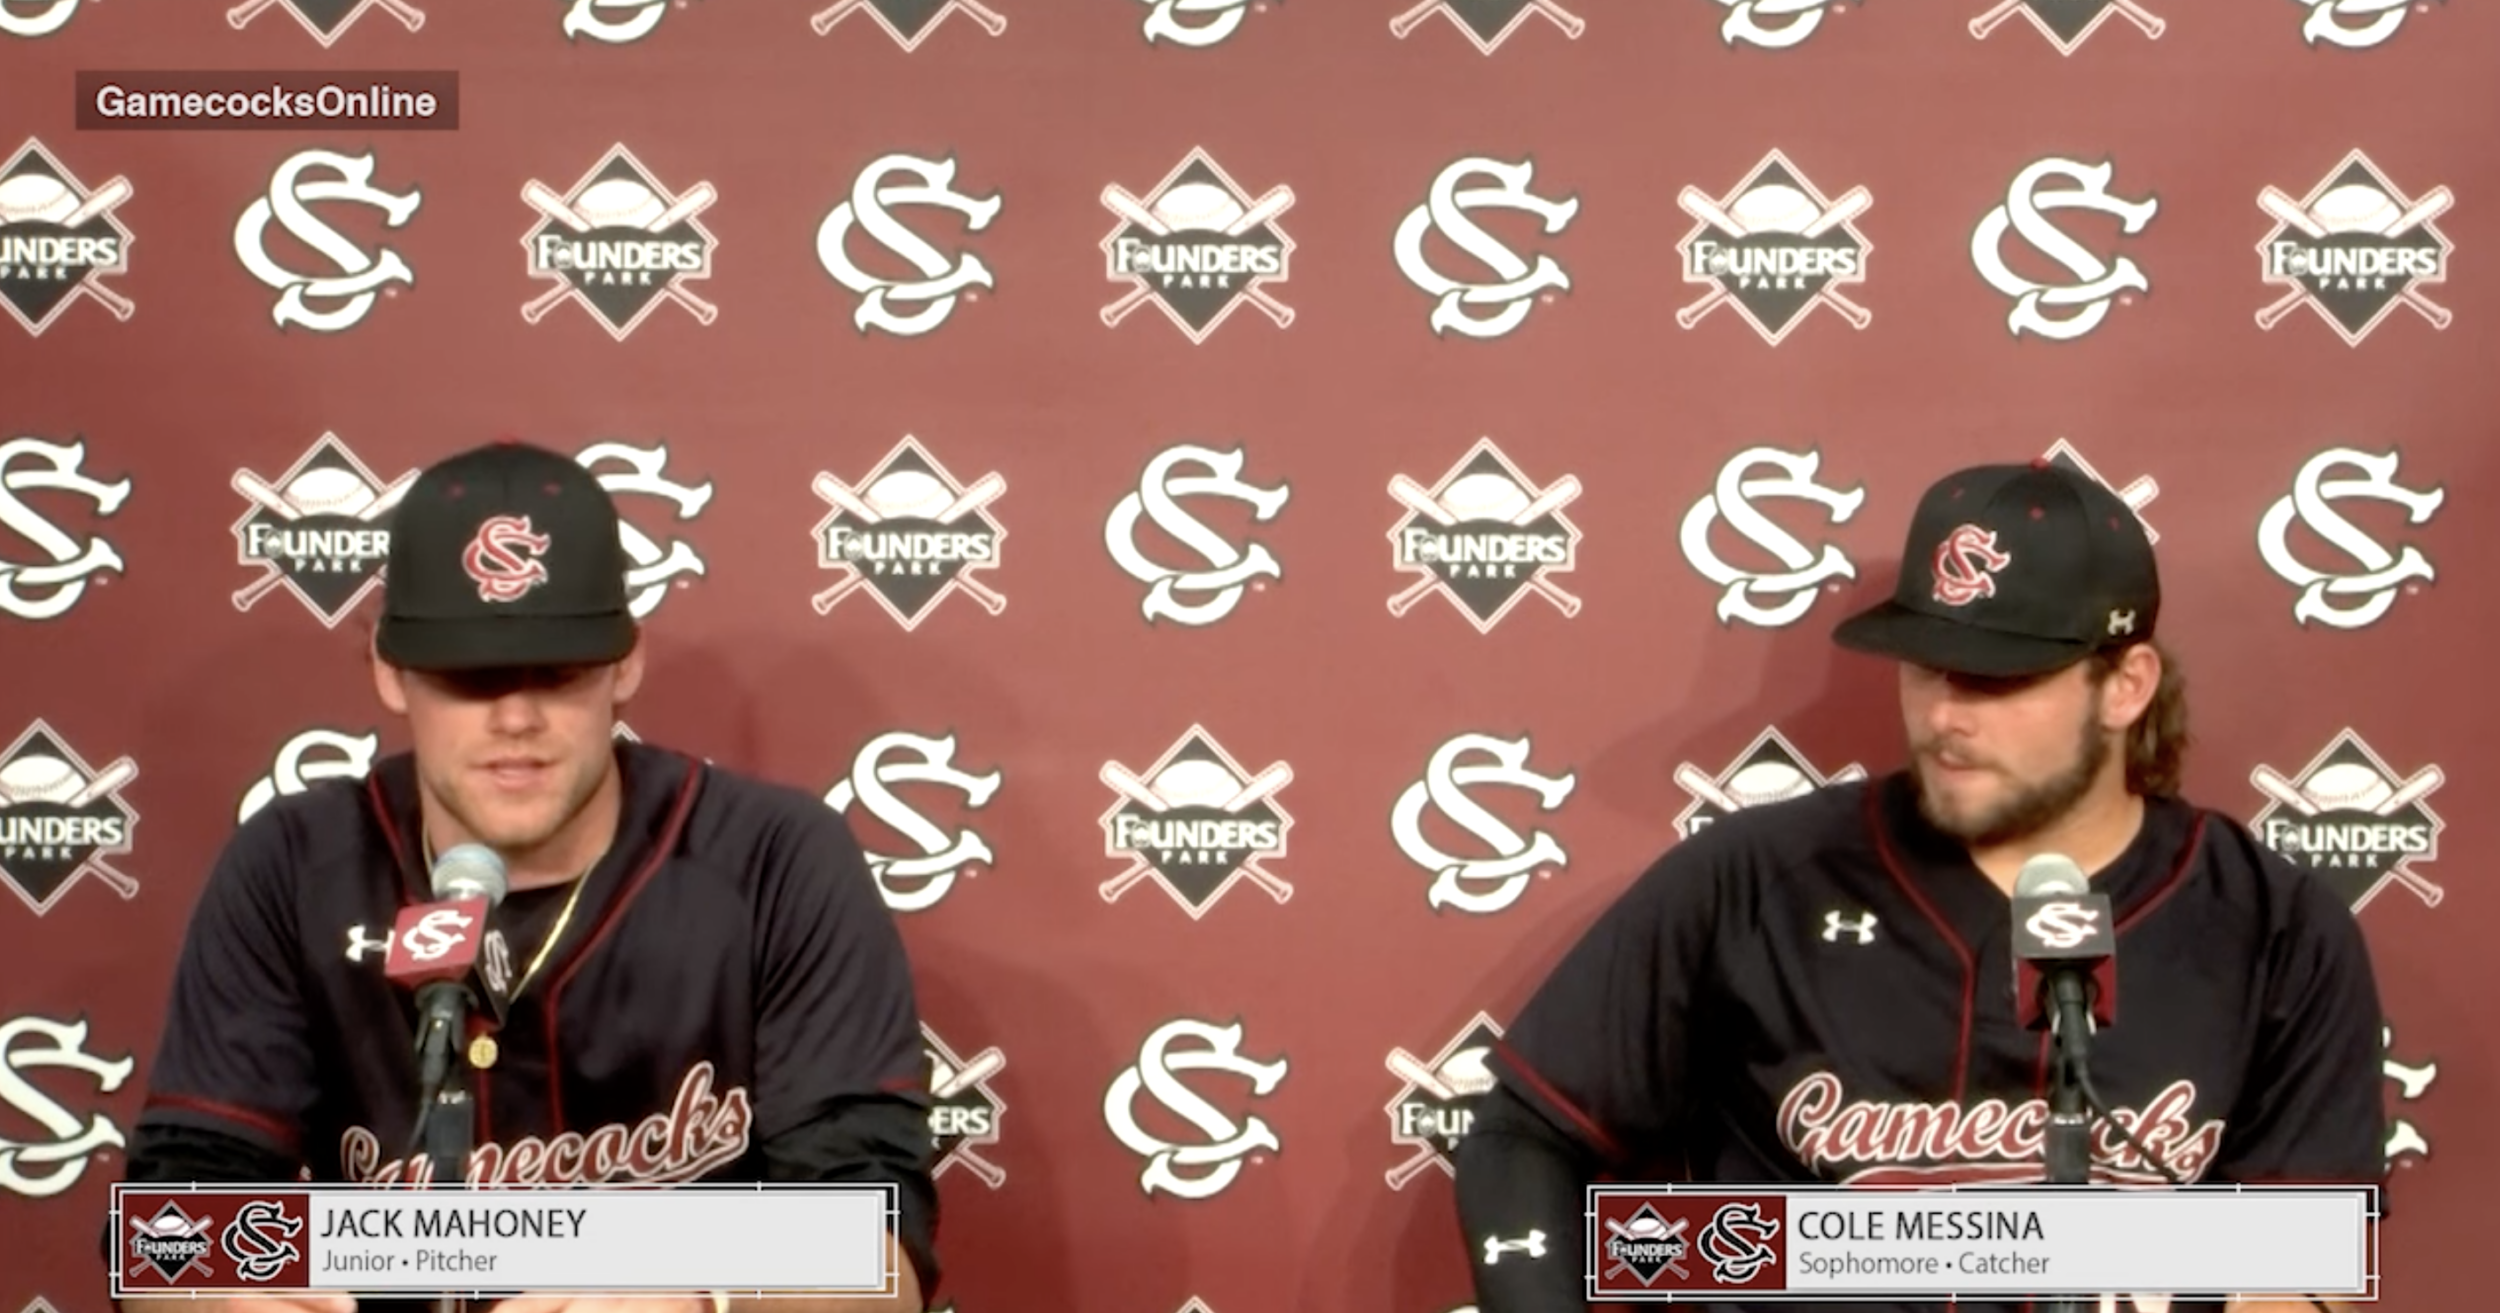 PostGame News Conference: (UMass Lowell) - Jack Mahoney and Cole Messina